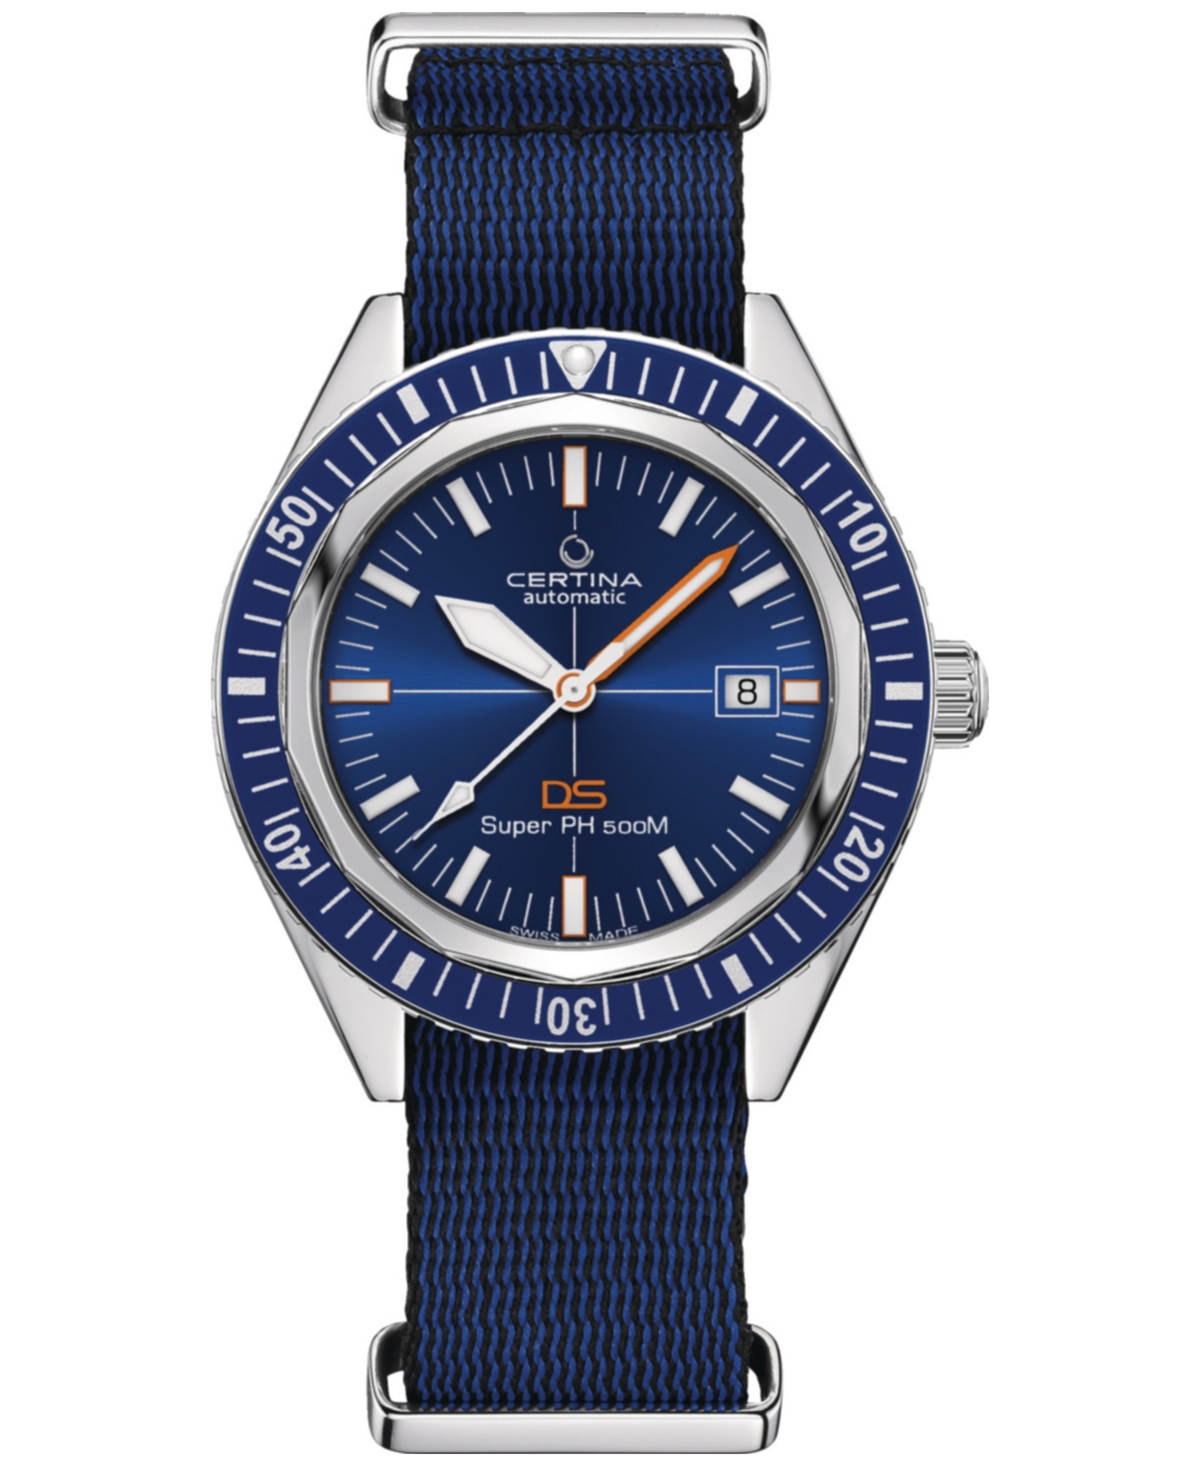 Certina Men's Swiss Automatic Ds Super Ph500m Blue Synthetic Strap Watch 43mm